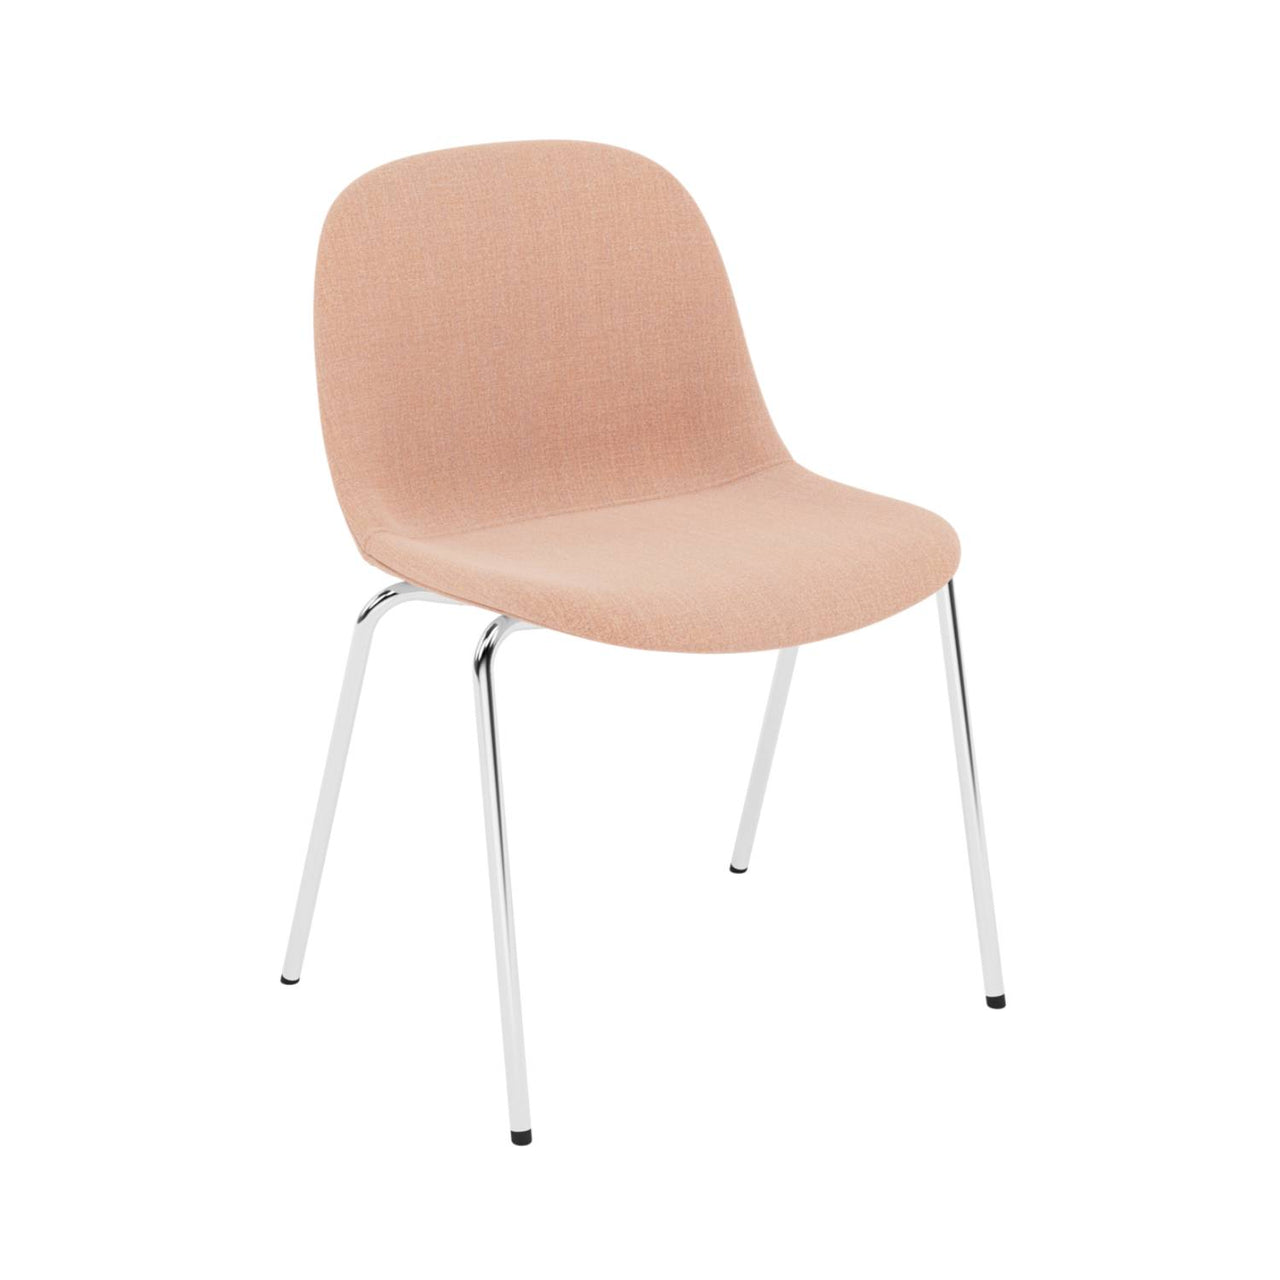 Fiber Side Chair: A-Base with Felt Glides + Recycled Shell + Upholstered